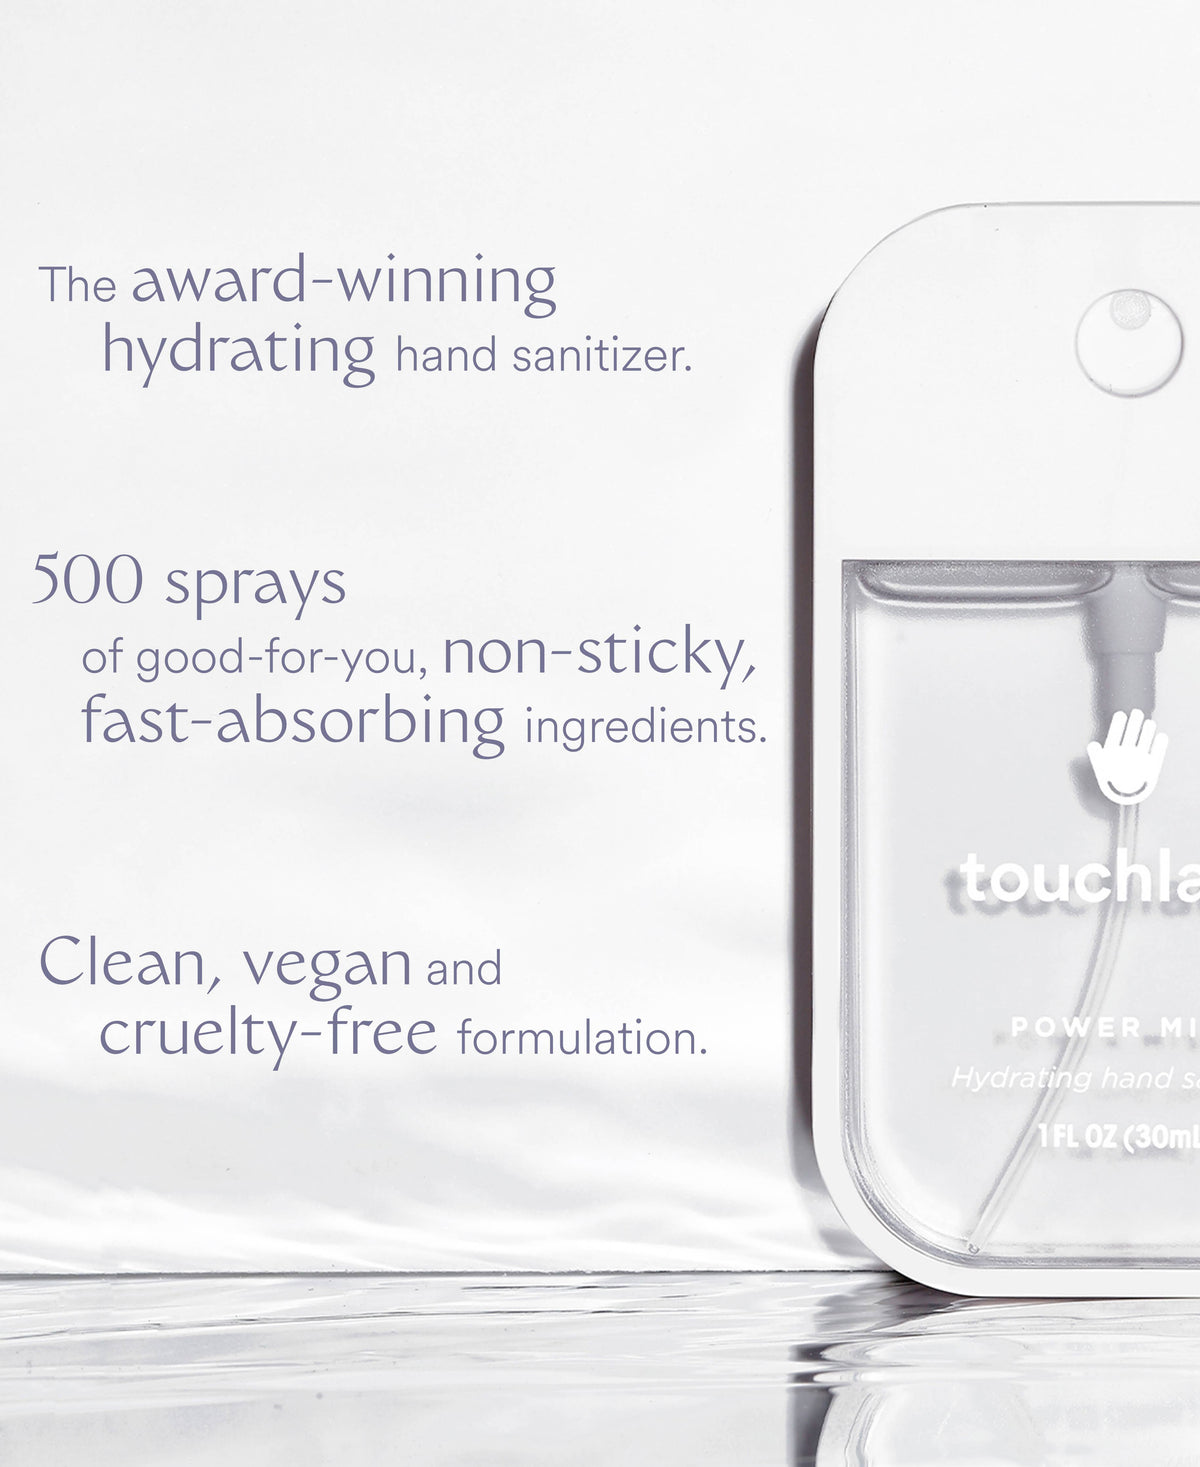 Power Mist Rainwater Hand Sanitizer by Touchland--Lemons and Limes Boutique